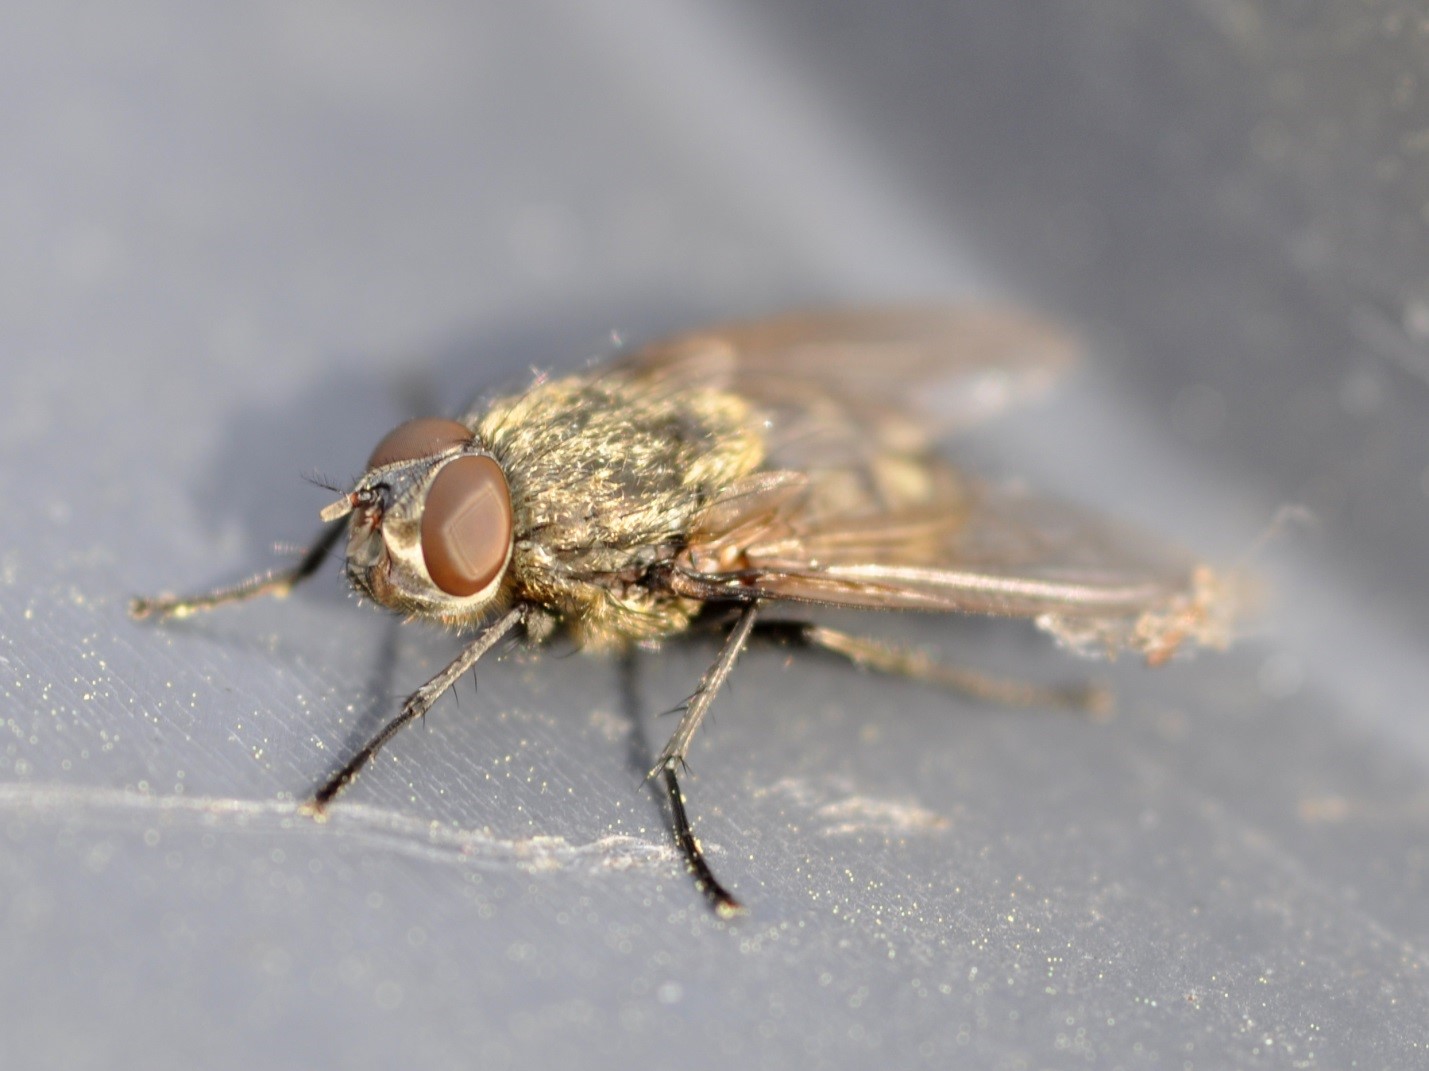 https://www.greenleafpestcontrol.com/wp-content/uploads/2015/09/Fall-Nuisance-Are-Cluster-Flies-Seeking-Shelter-in-Your-Home.jpg